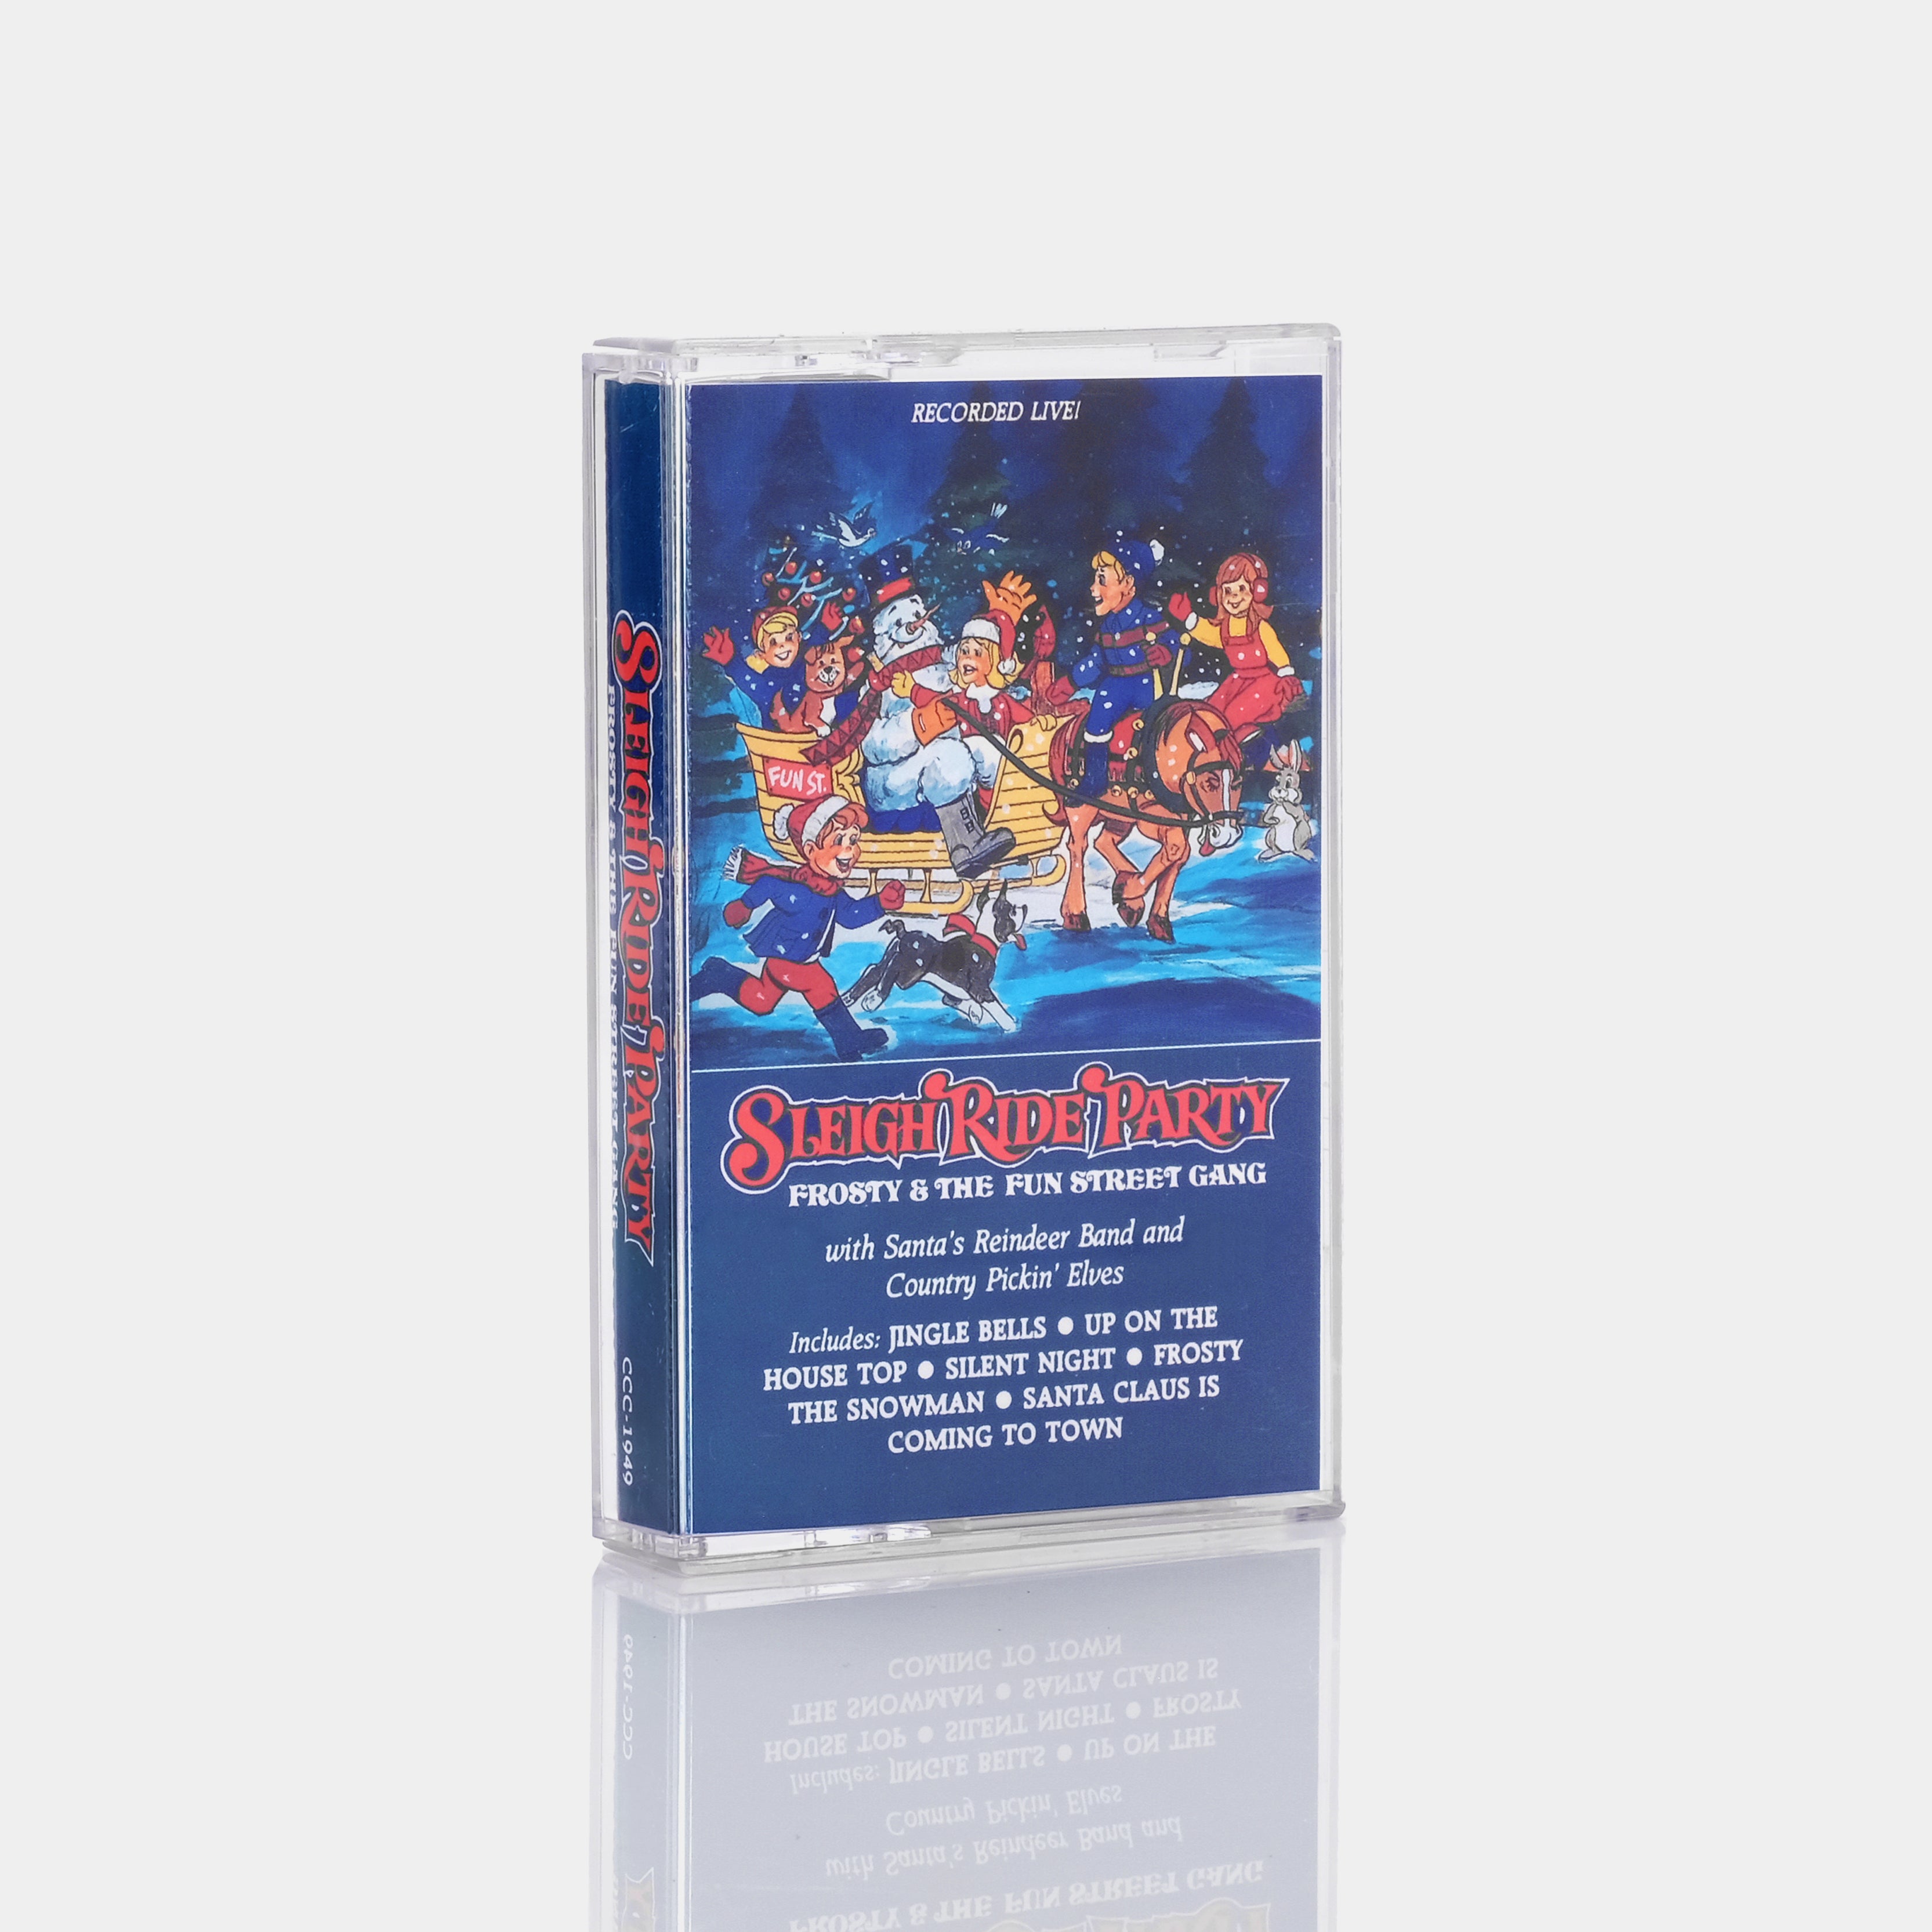 Frosty & The Fun Street Gang - Sleigh Ride Party Cassette Tape